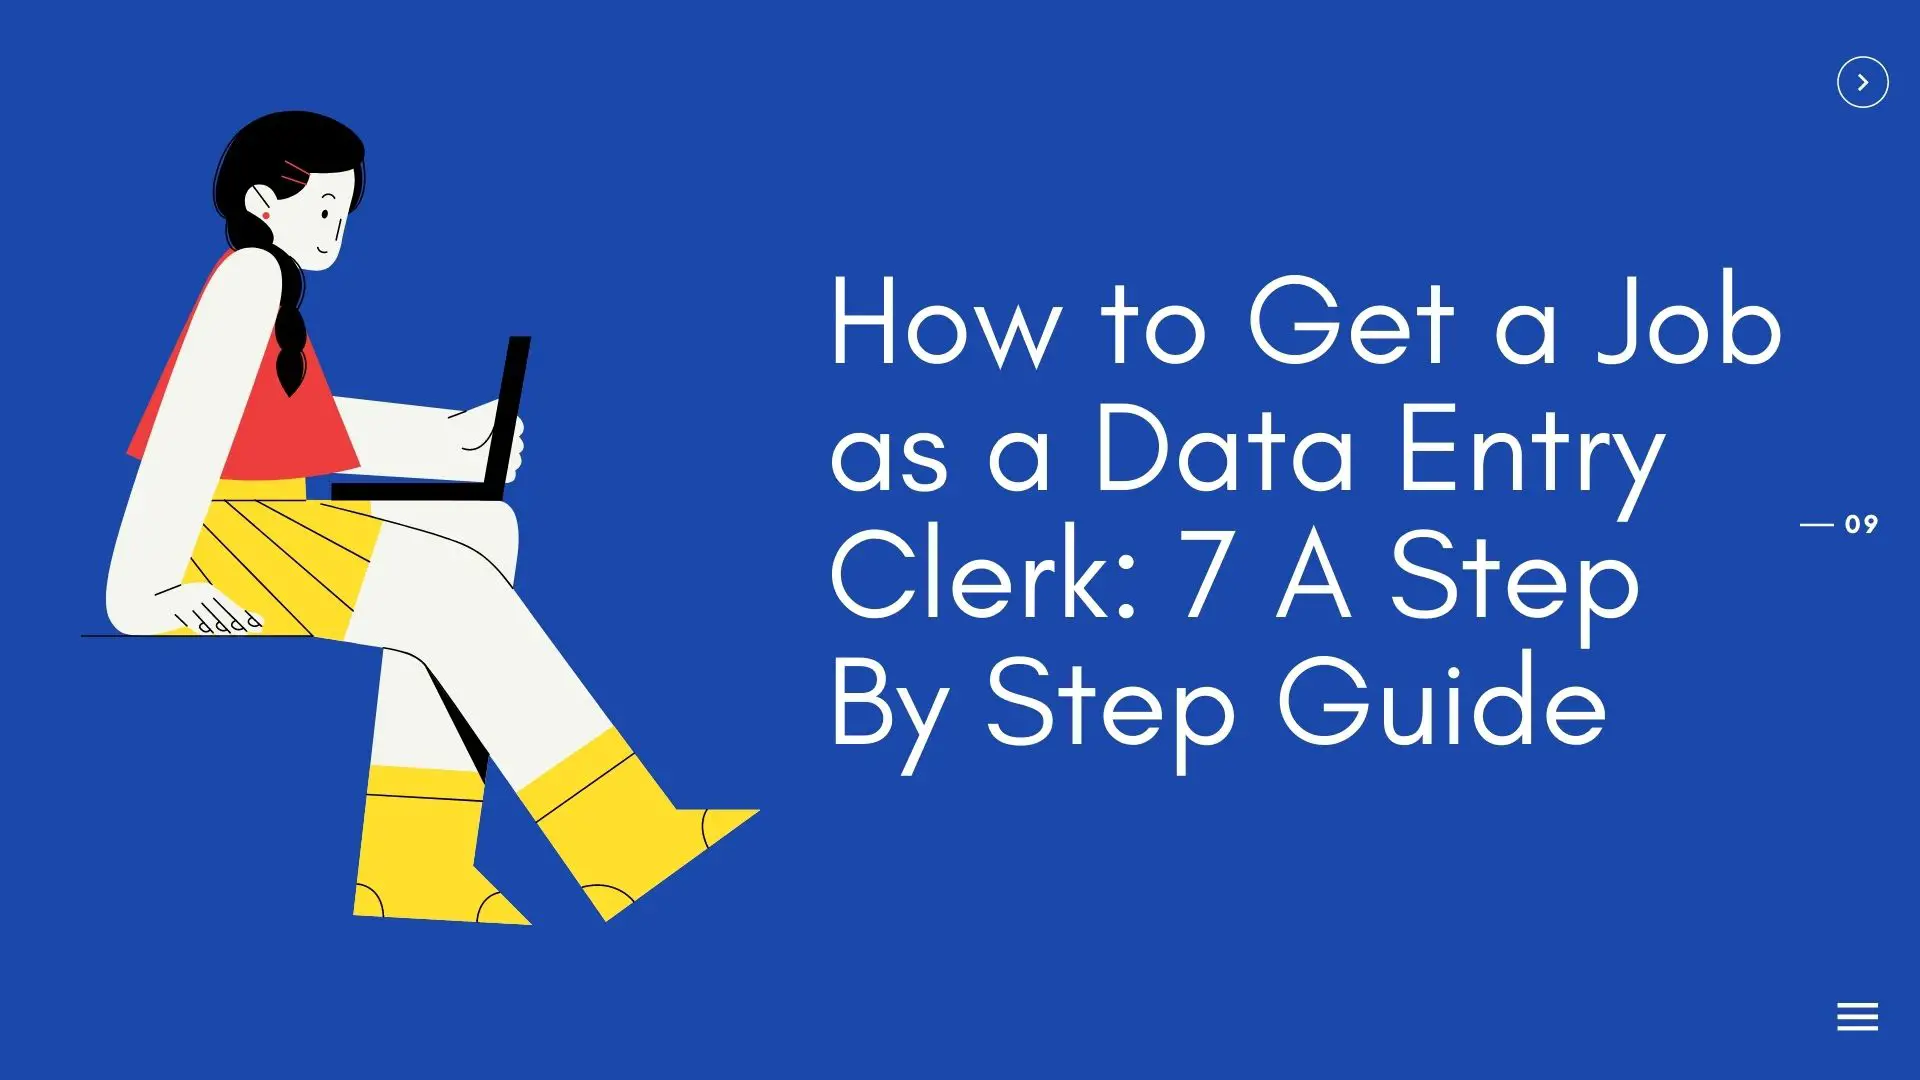 How to Get a Job as a Data Entry Clerk: 7 A Step By Step Guide